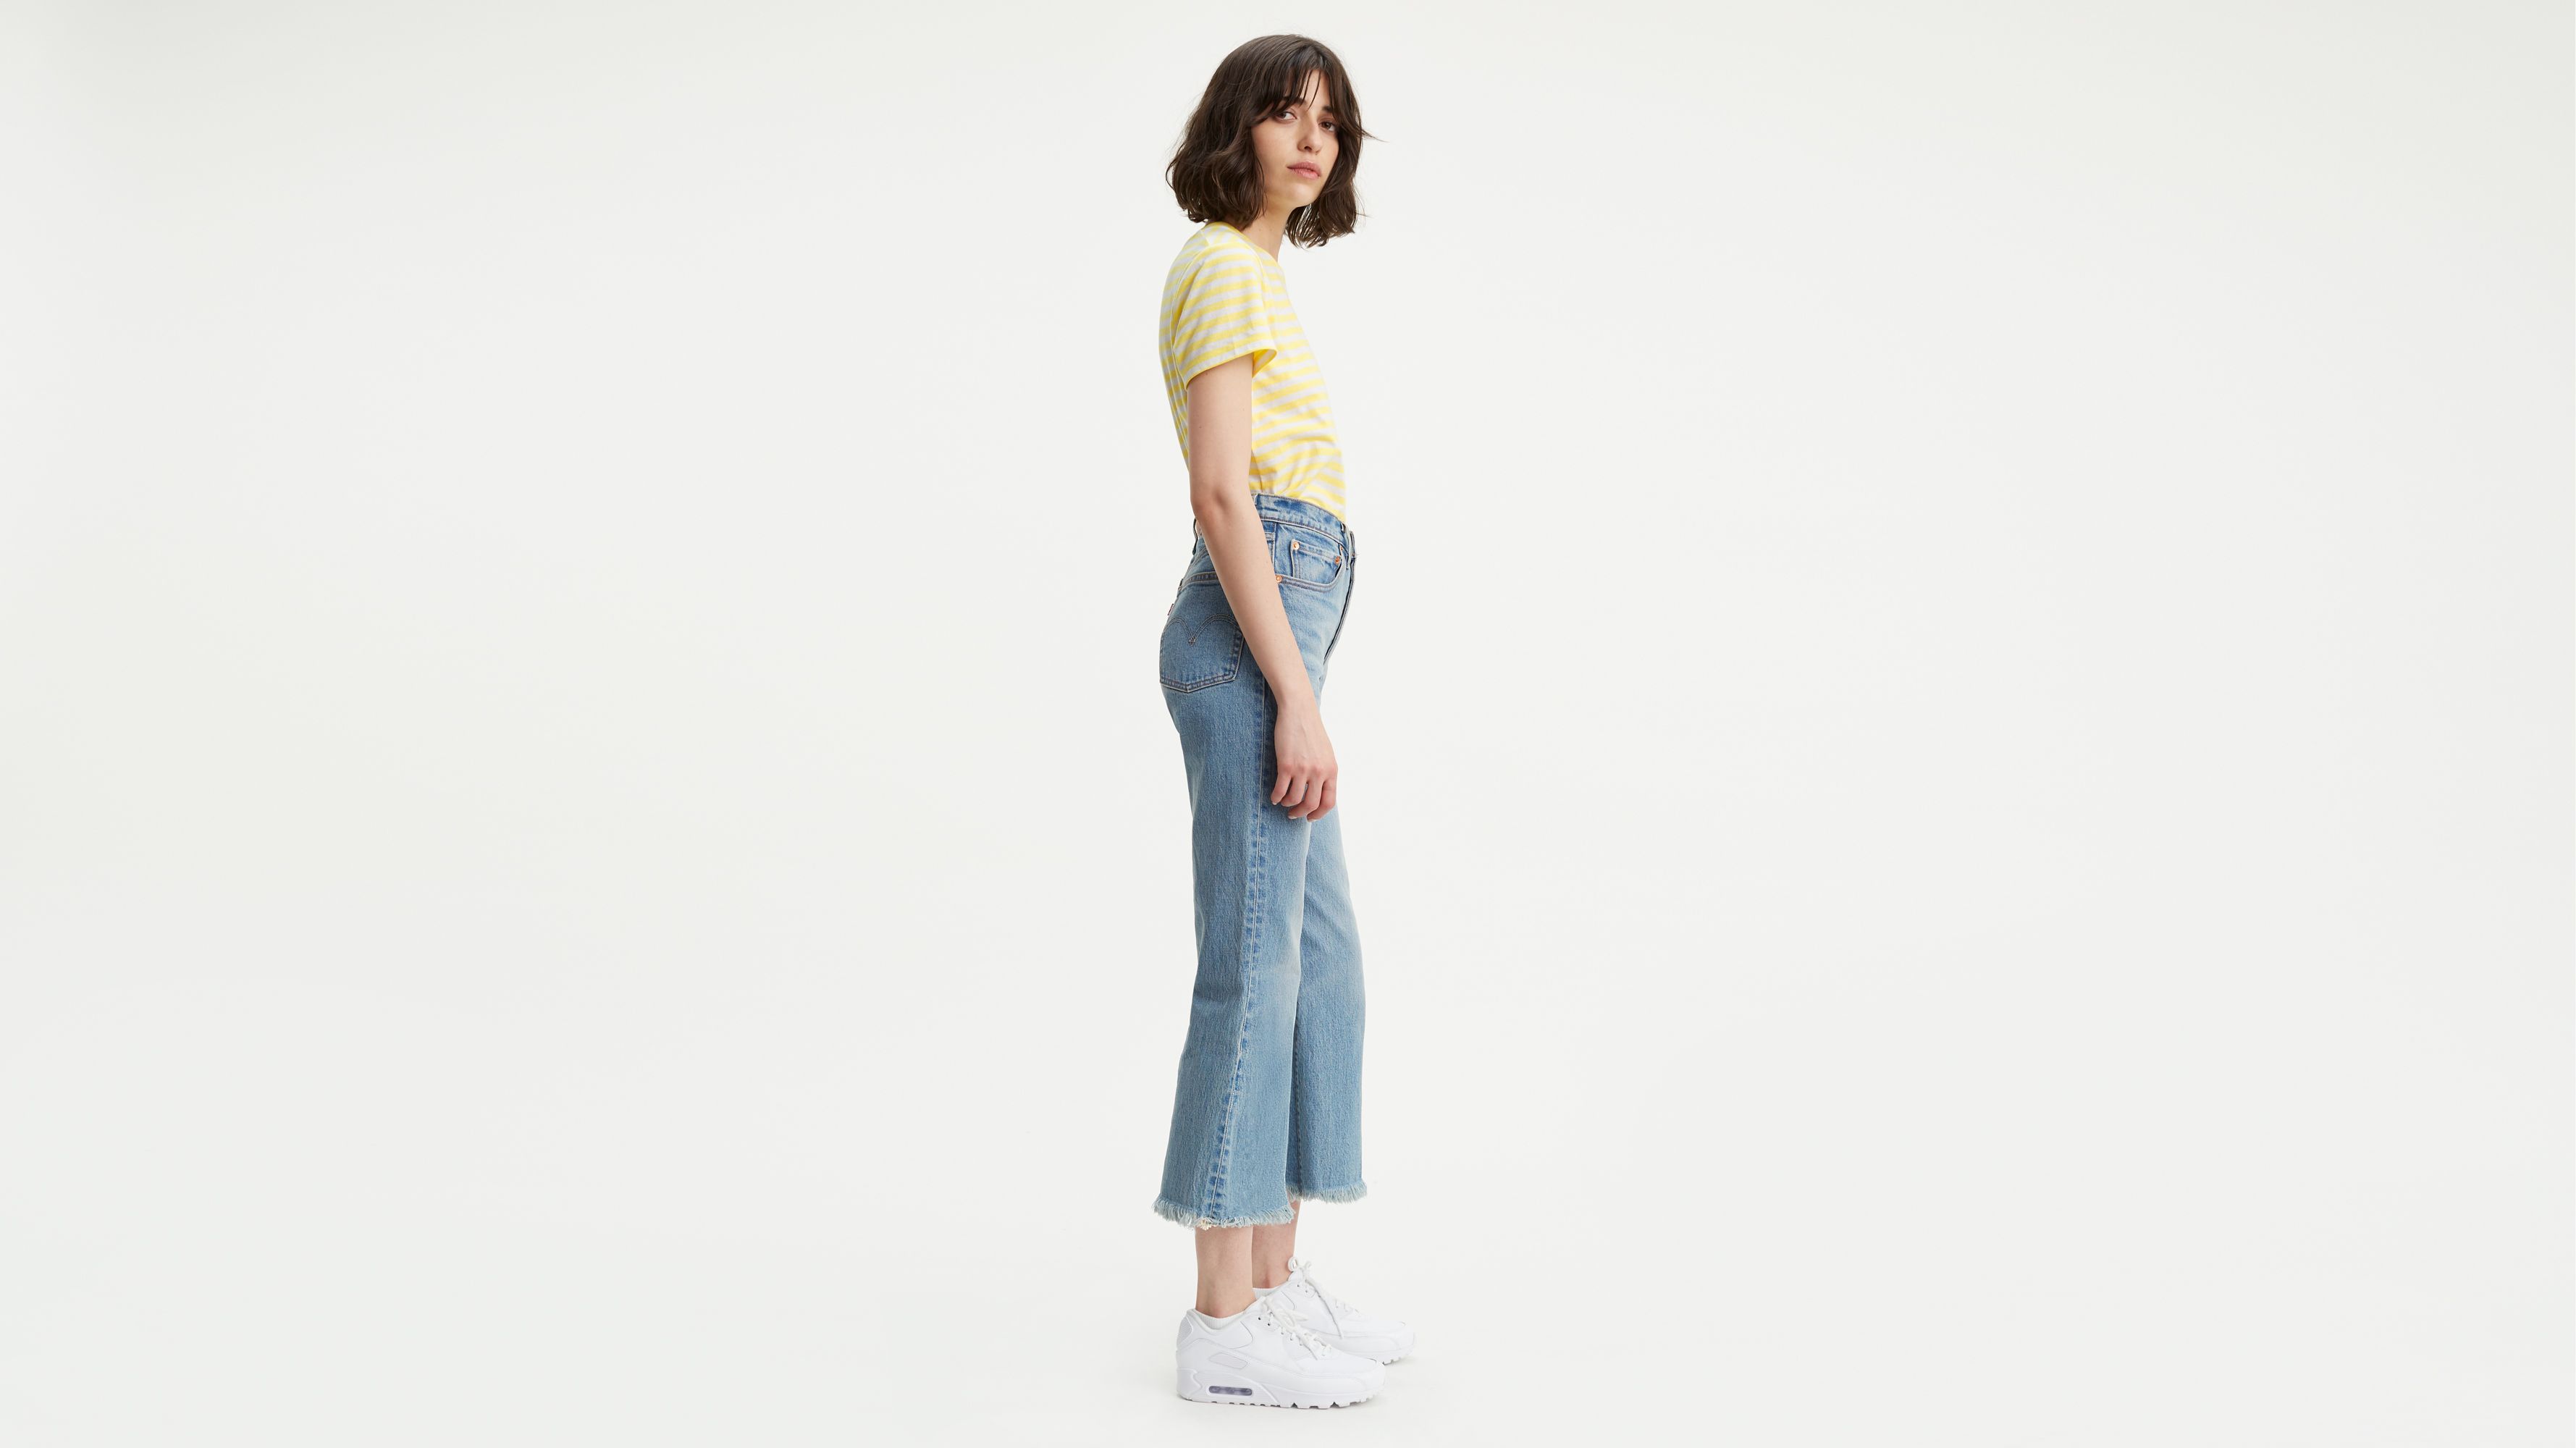 Ribcage Cropped Flare Women's Jeans - Light Wash | Levi's® US